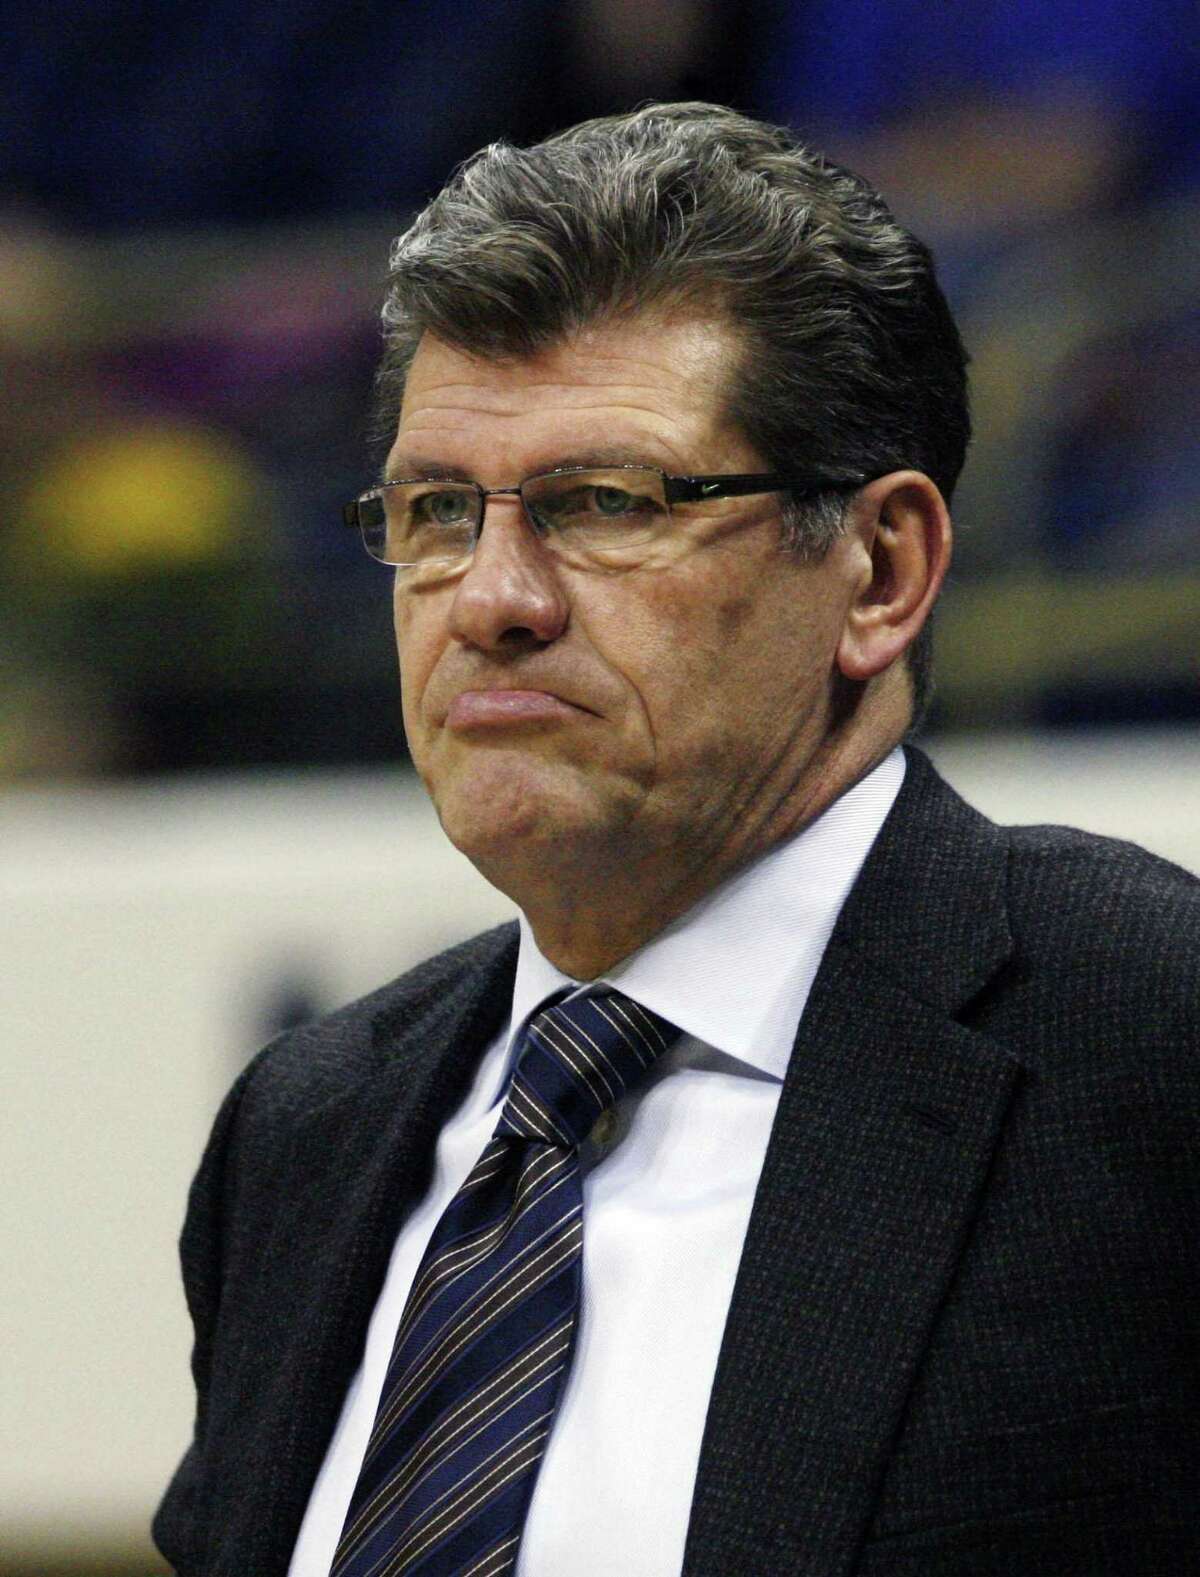 February 21, 2012; Pittsburgh,PA, USA: Connecticut Huskies head coach Geno Auriemma reacts on the sidelines against the Pittsburgh Panthers during the second half at the Petersen Events Center. UConn won 86-37. Mandatory Credit: Charles LeClaire-USPRESSWIRE